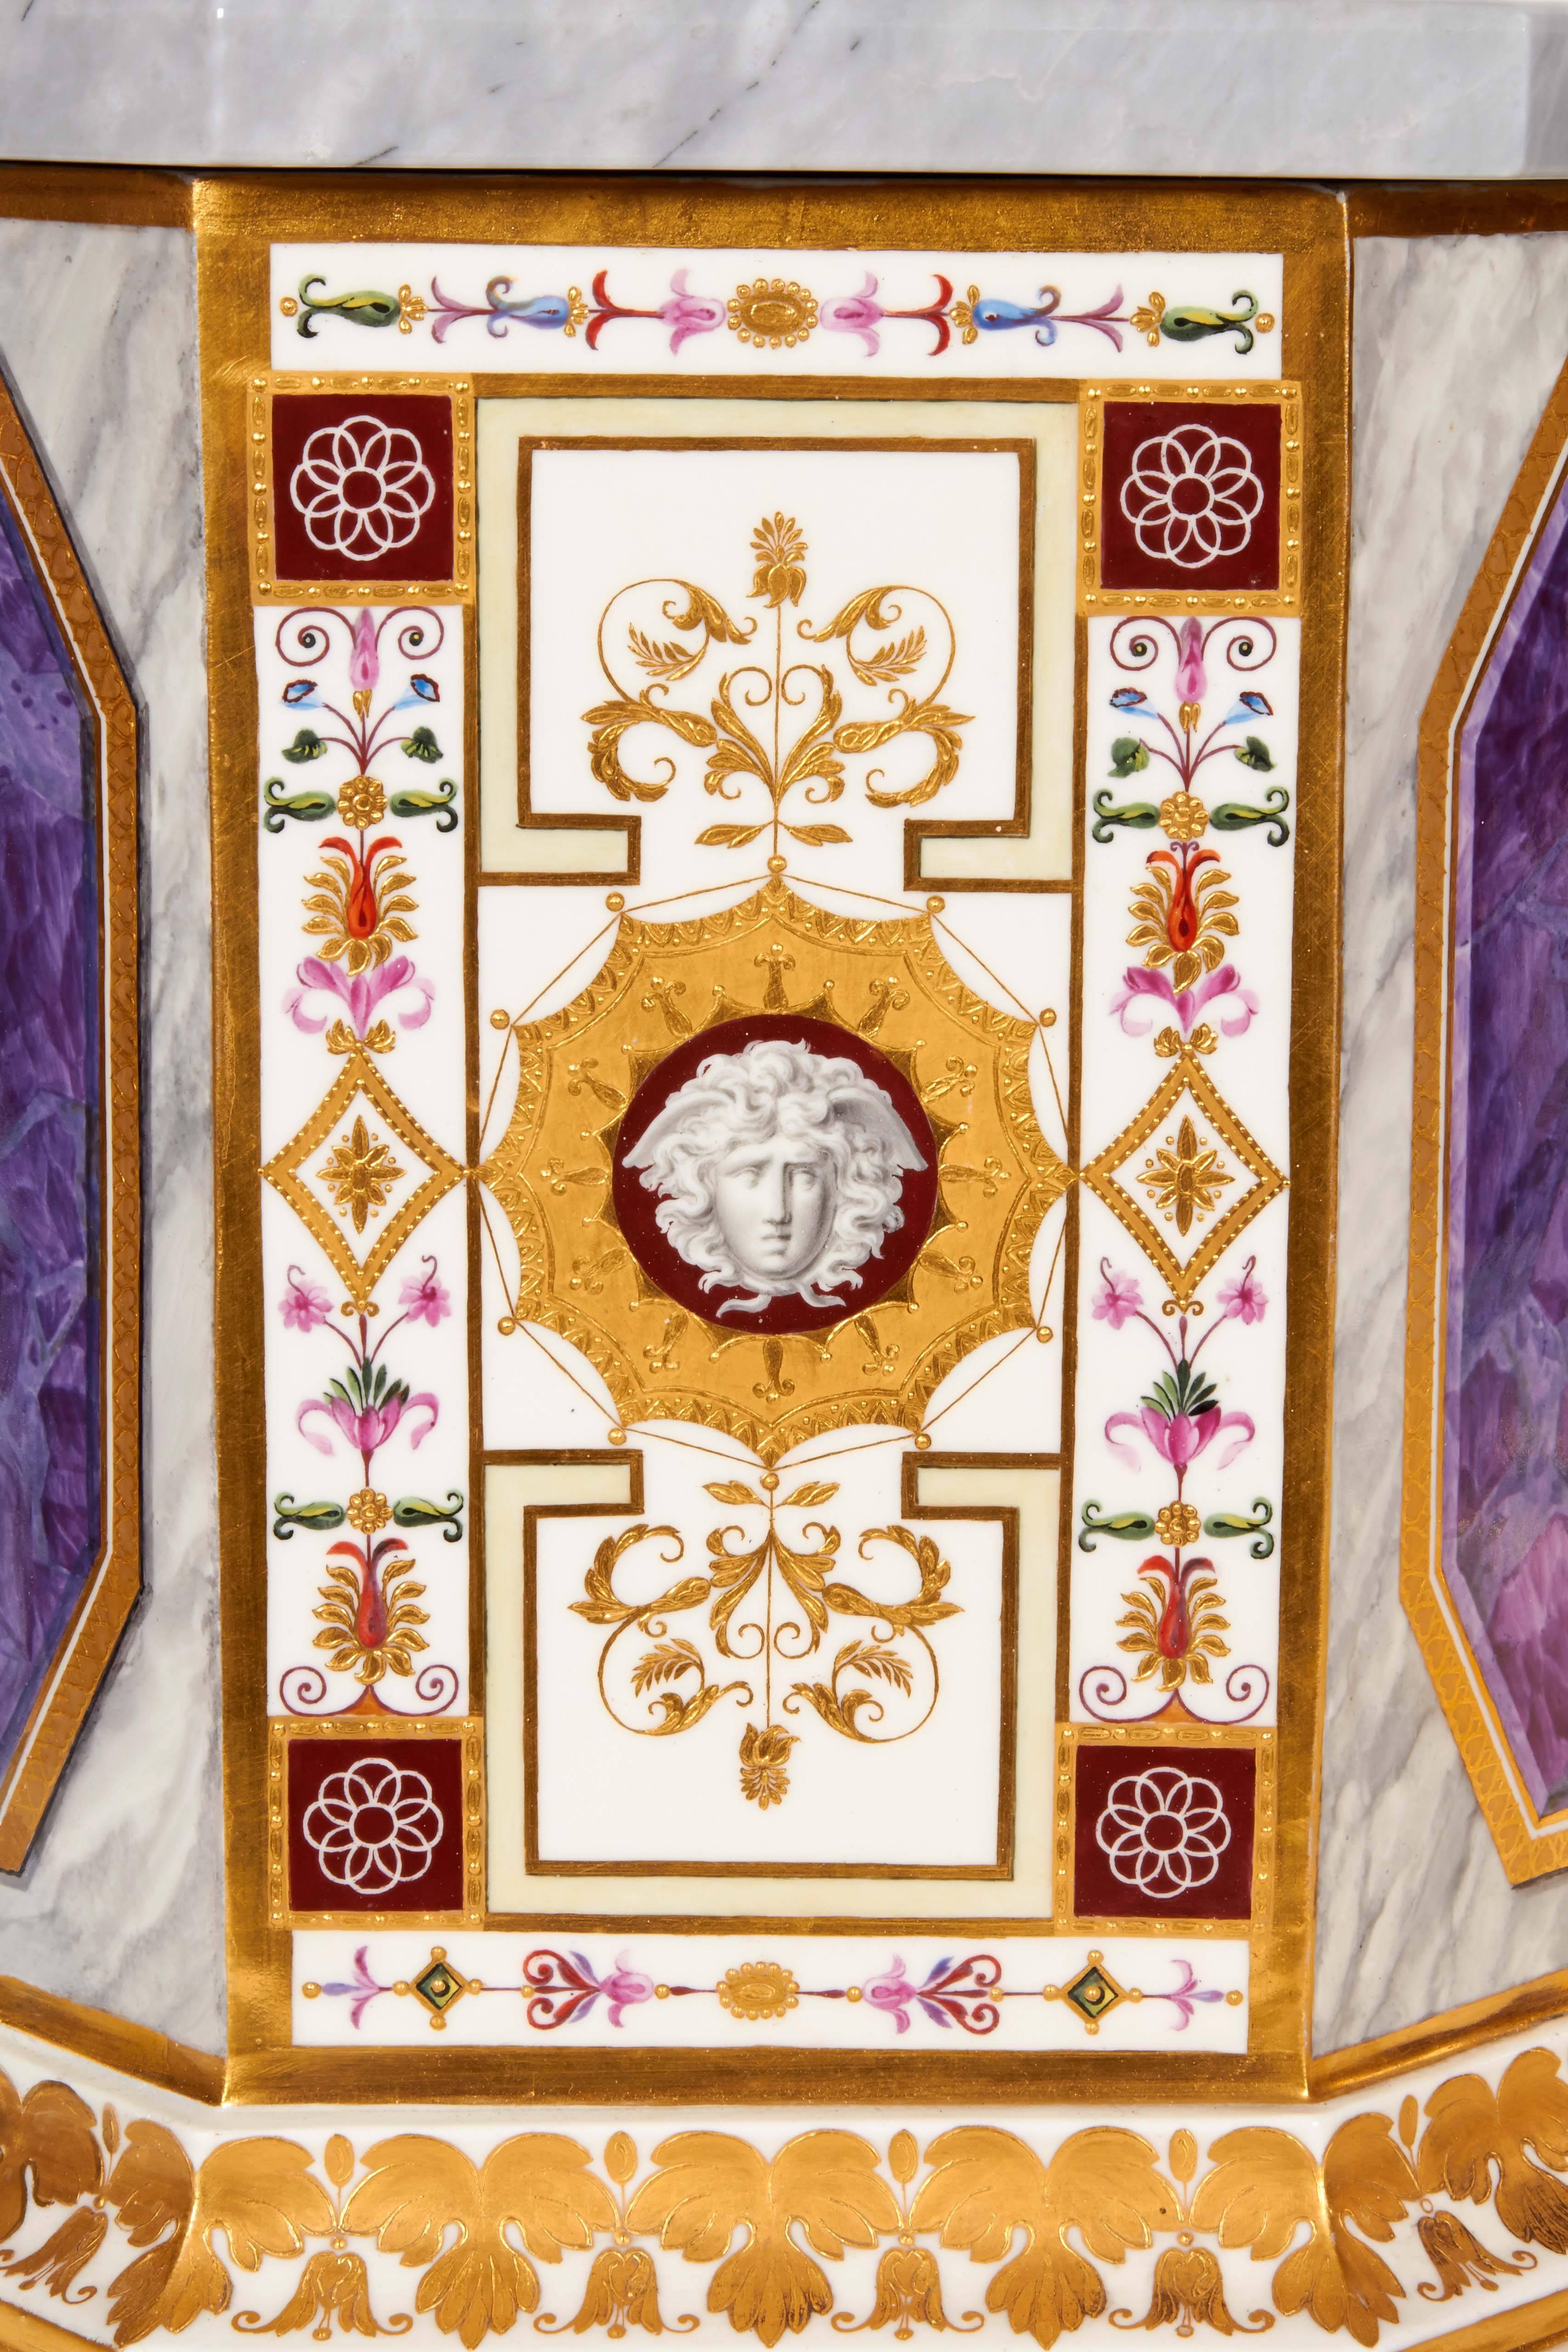 One with impressed date code for 1800 and P.
Each of stepped octagonal form, the sides alternating either faux amethyst canted rectangular panels within raised gilt surrounds on a faux marble ground, or panels centering grisaille winged Hermes